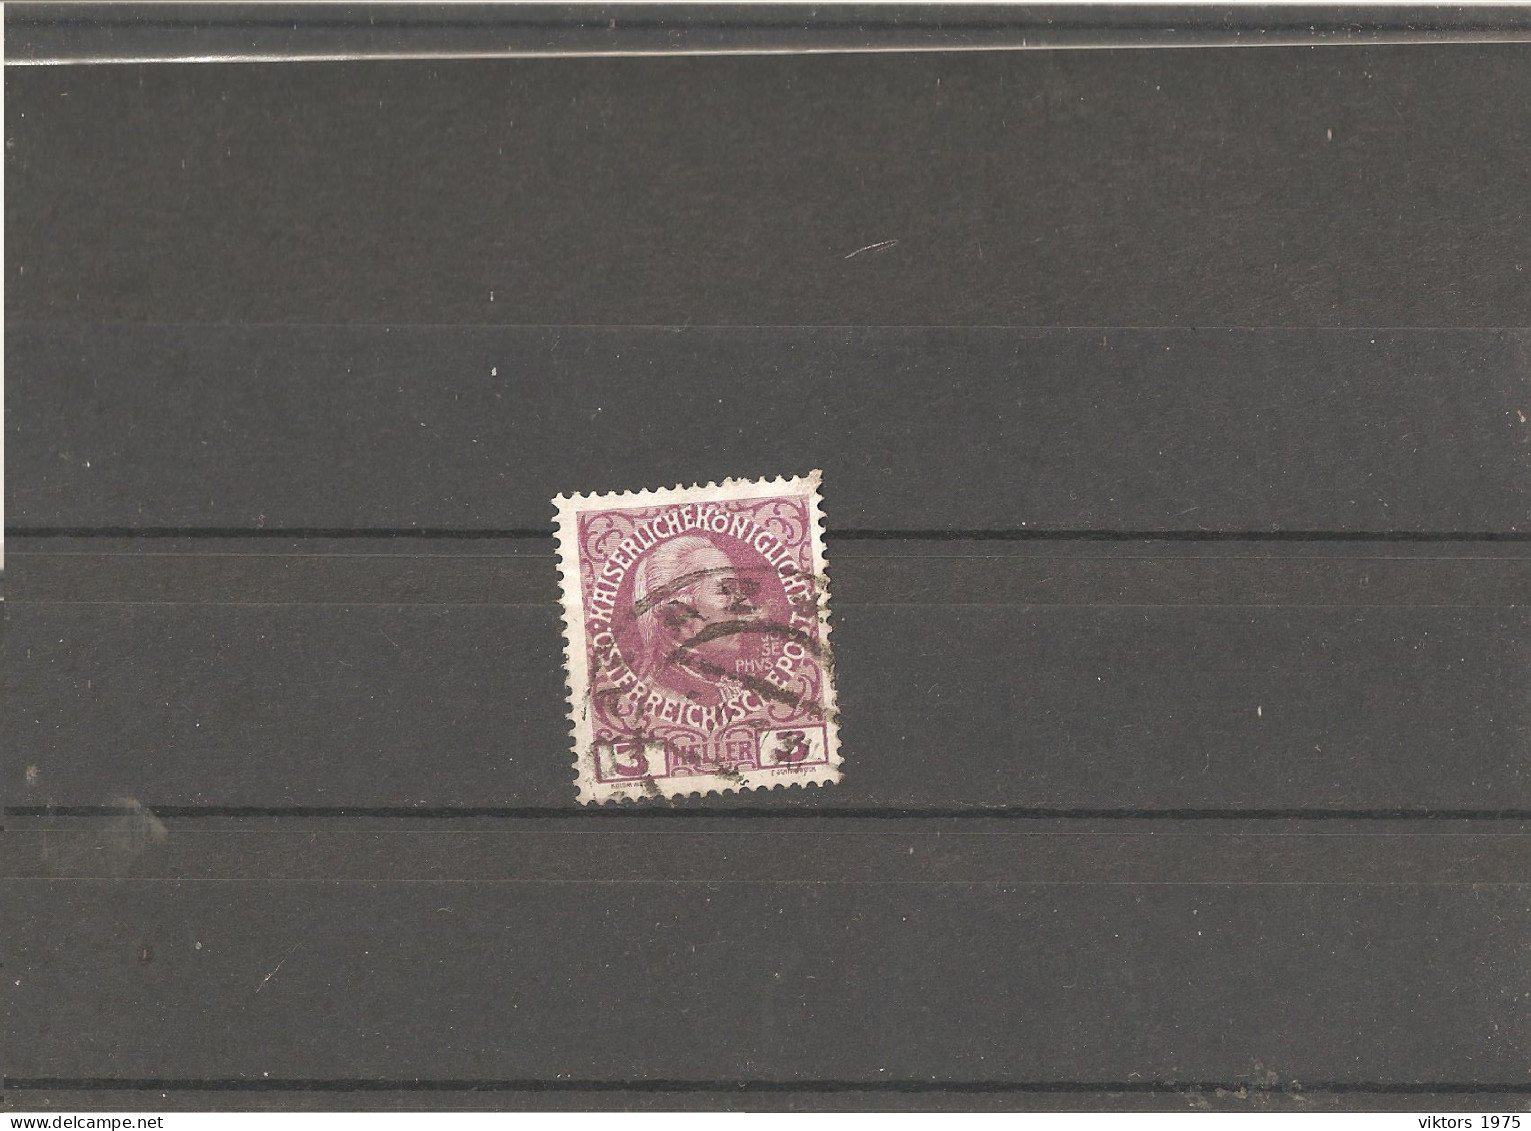 Used Stamp Nr.141 In MICHEL Catalog - Used Stamps